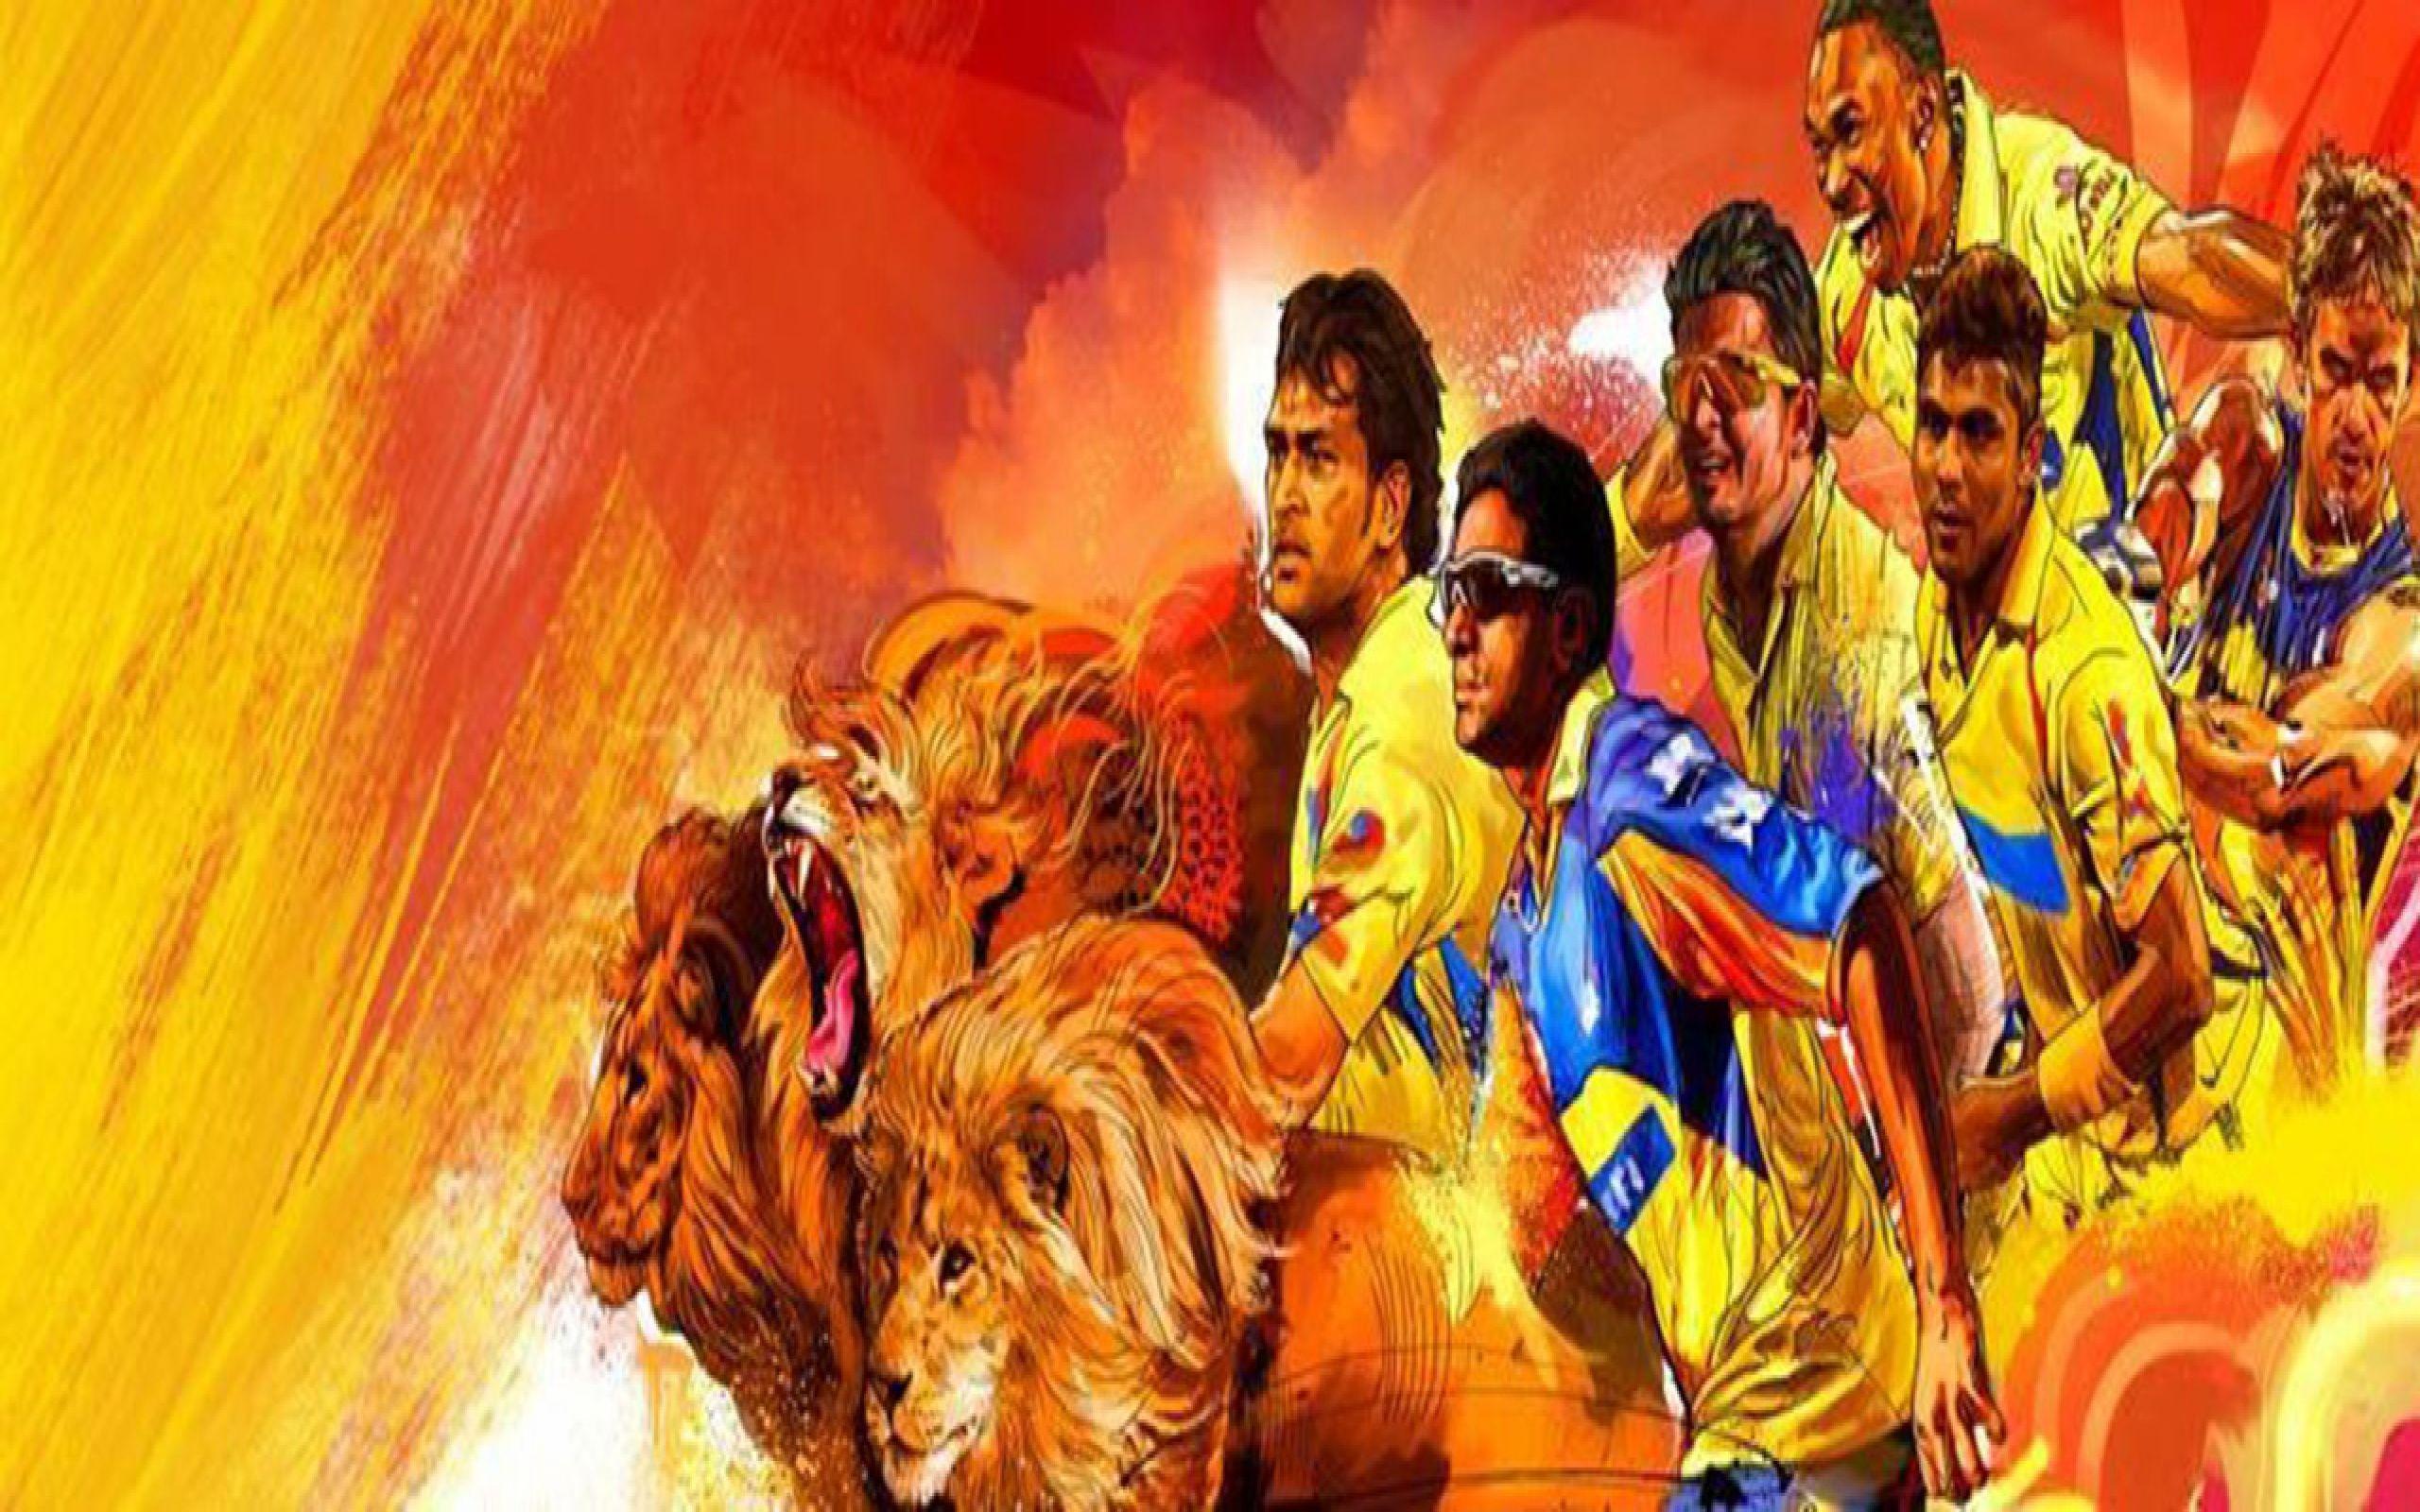 IPL HD WALLPAPER CHENNAI SUPER KINGS on fine art paper 13x19 Fine Art Print  - Art & Paintings posters in India - Buy art, film, design, movie, music,  nature and educational paintings/wallpapers